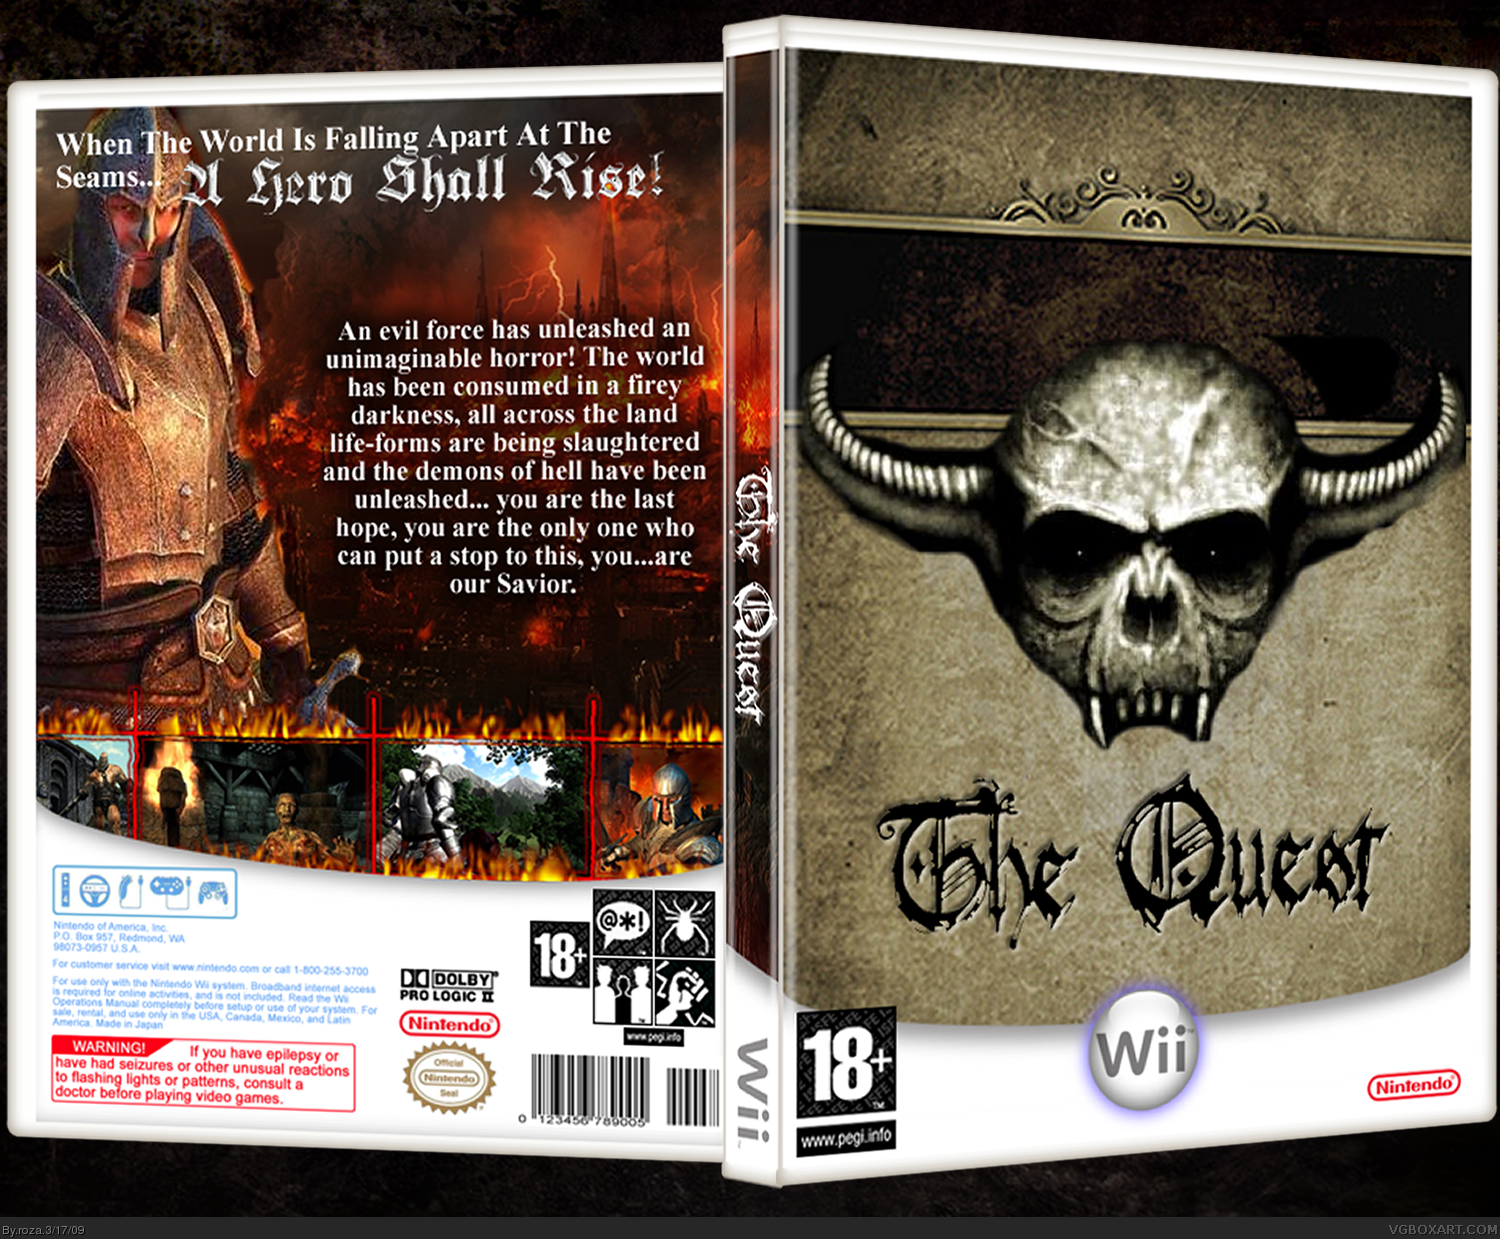 The Quest box cover